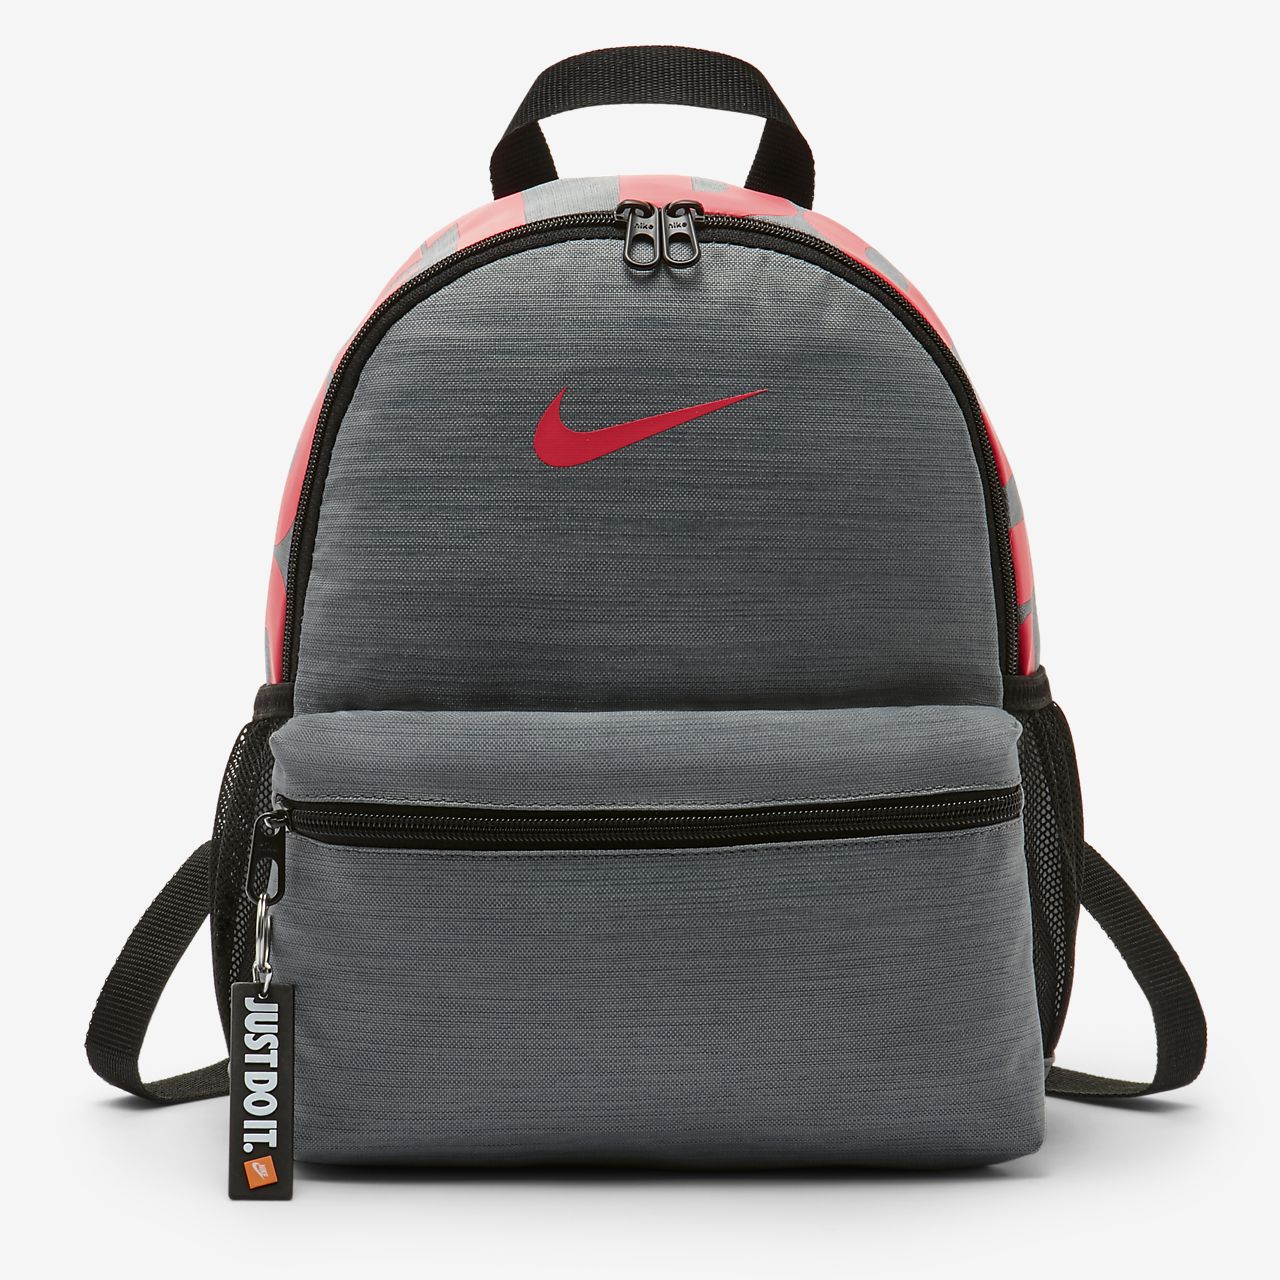 just do it small bag